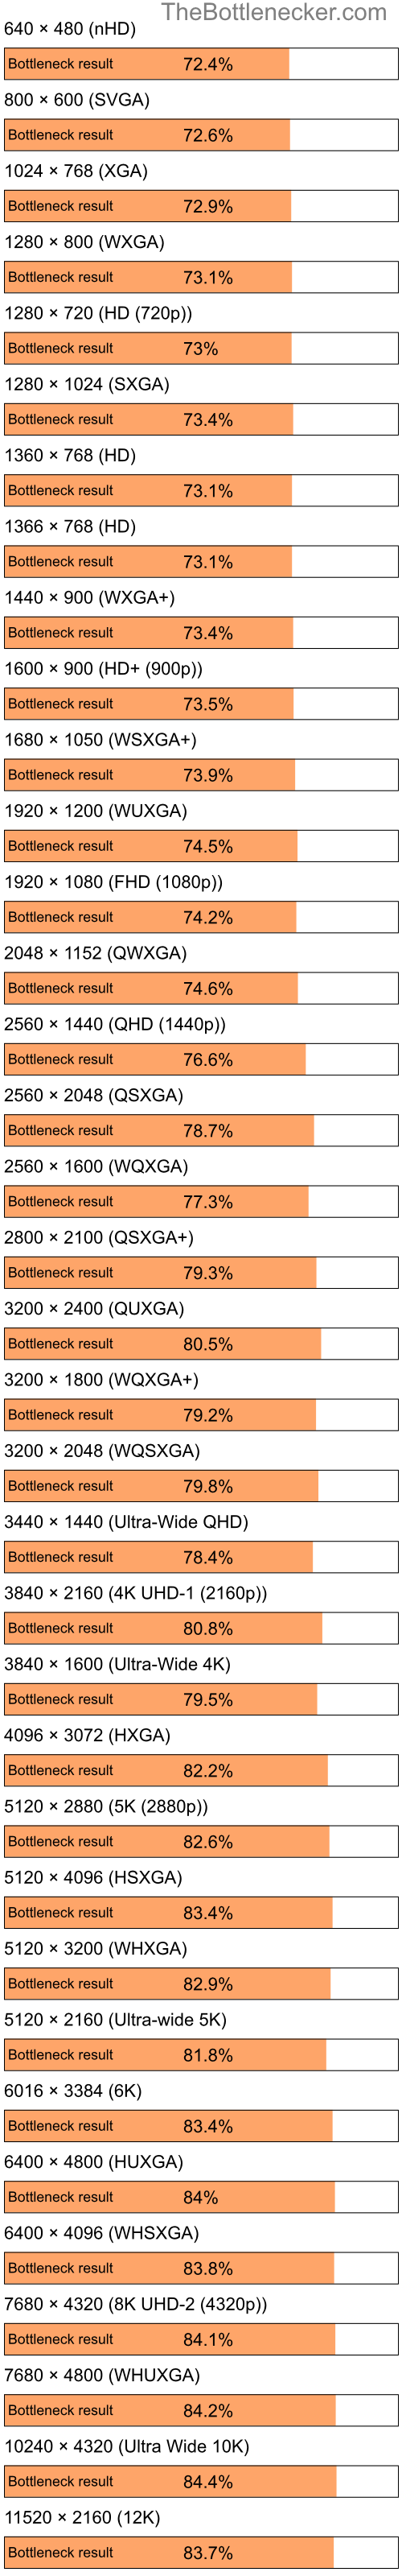 Bottleneck results by resolution for Intel Pentium 4 and NVIDIA GeForce 9300 GE in Graphic Card Intense Tasks